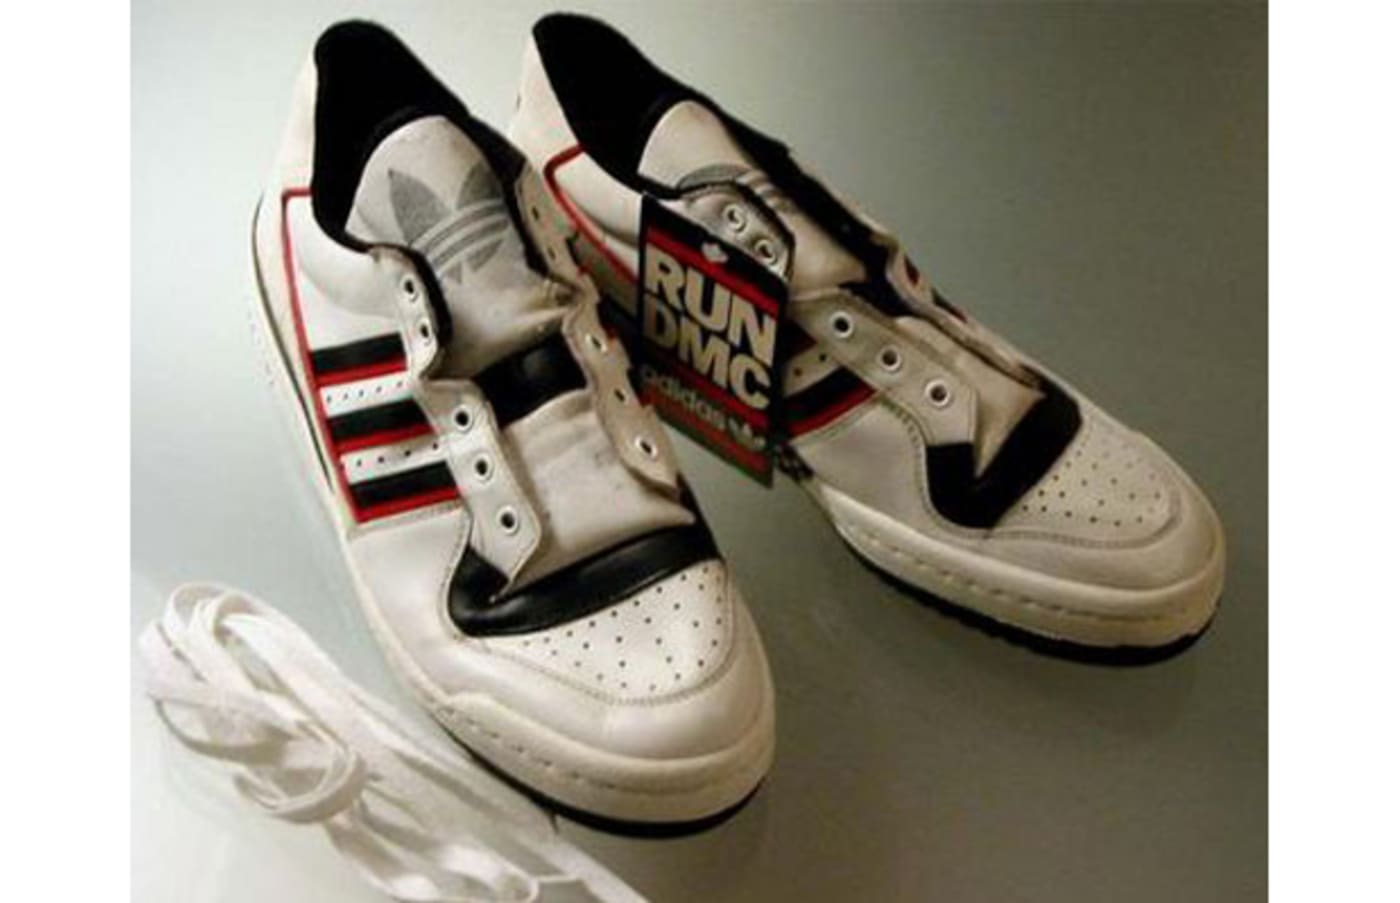 adidas tennis shoes 1980s